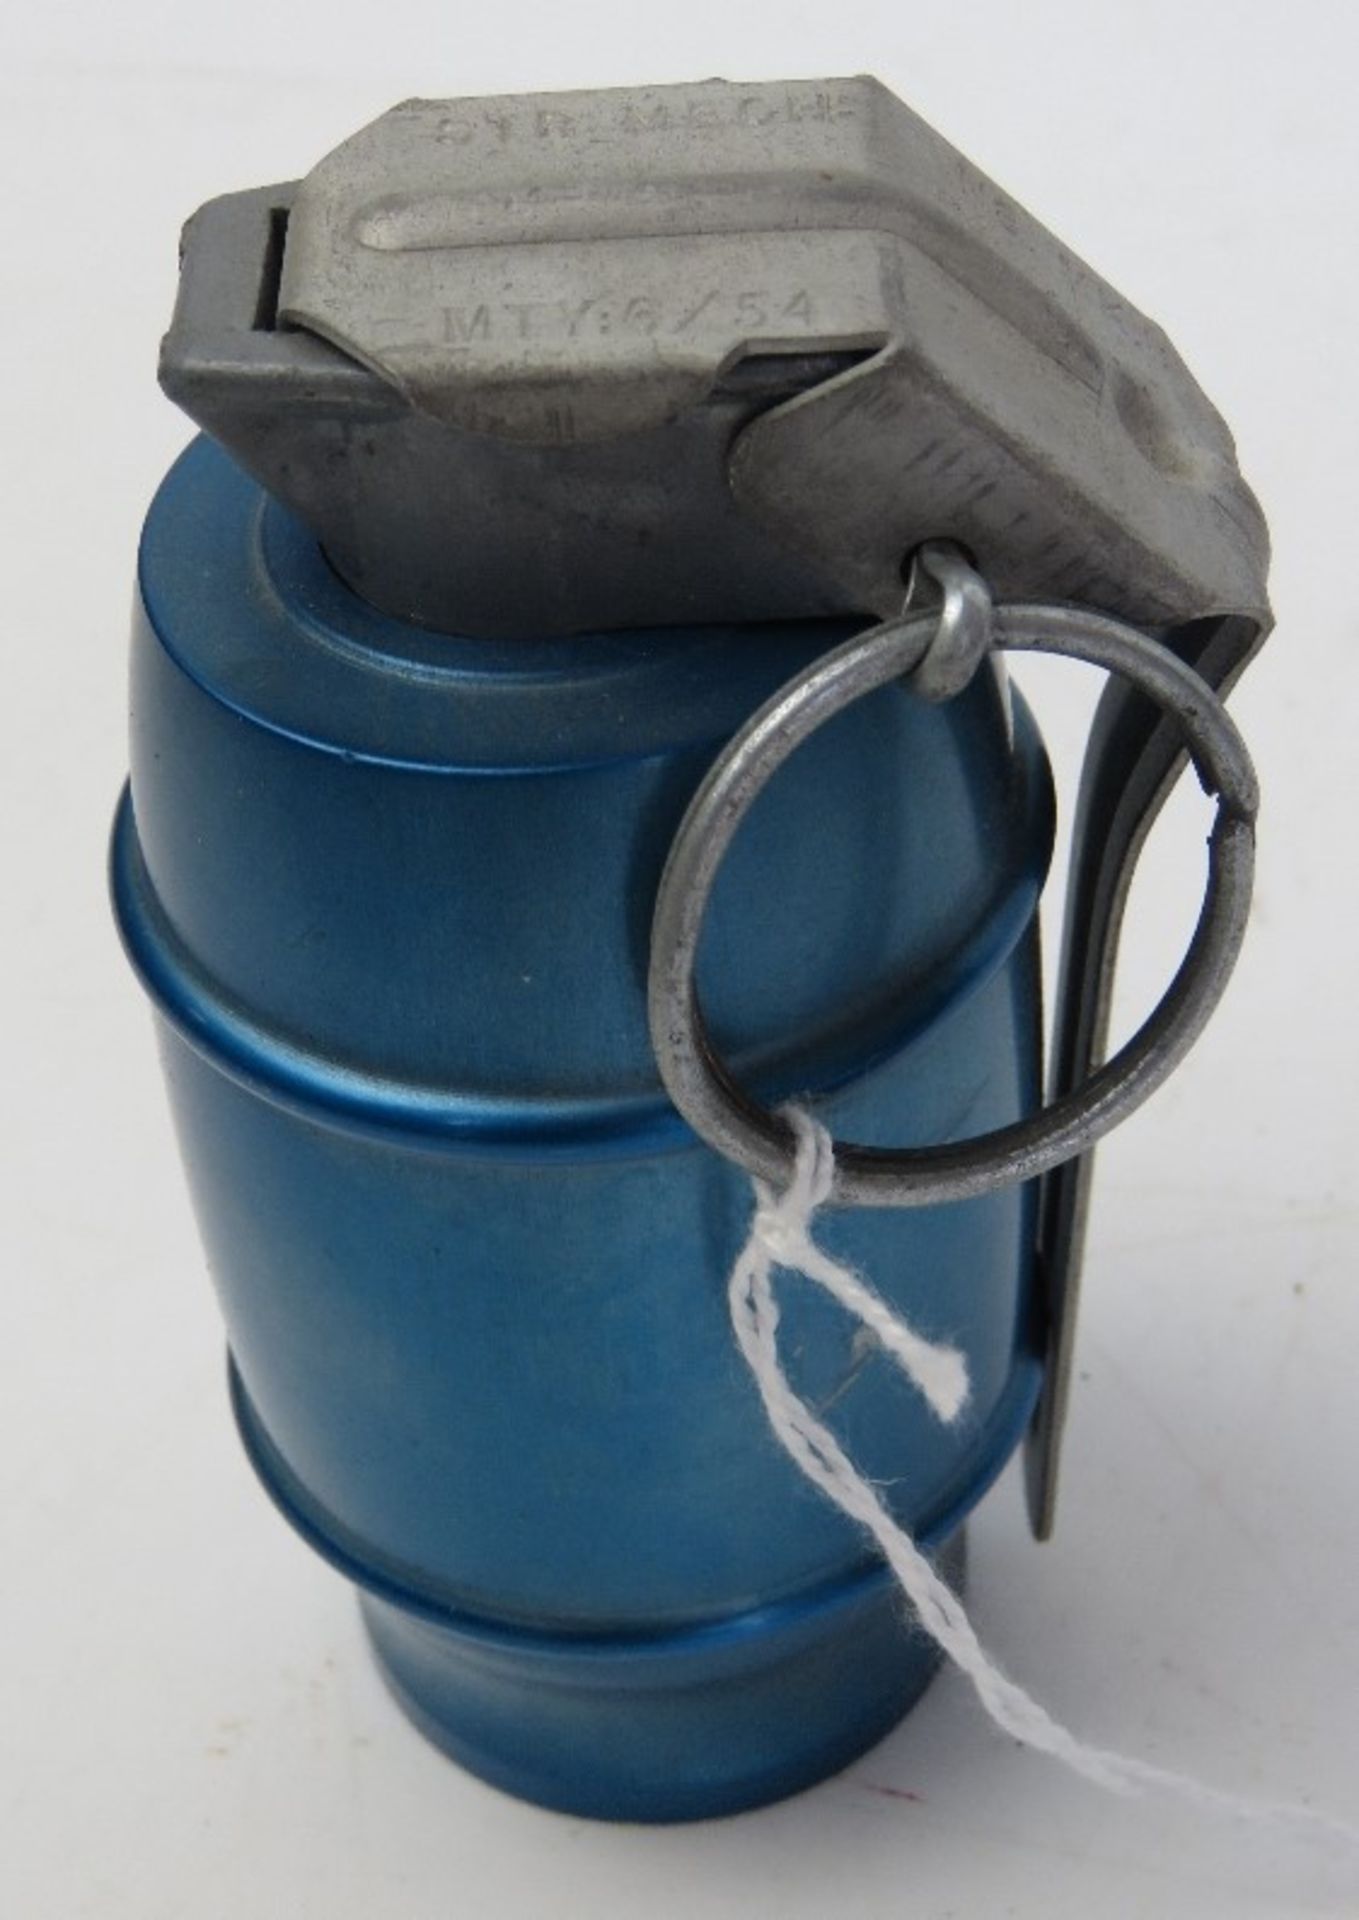 An inert British Prototype training grenade with N.8 fuse.